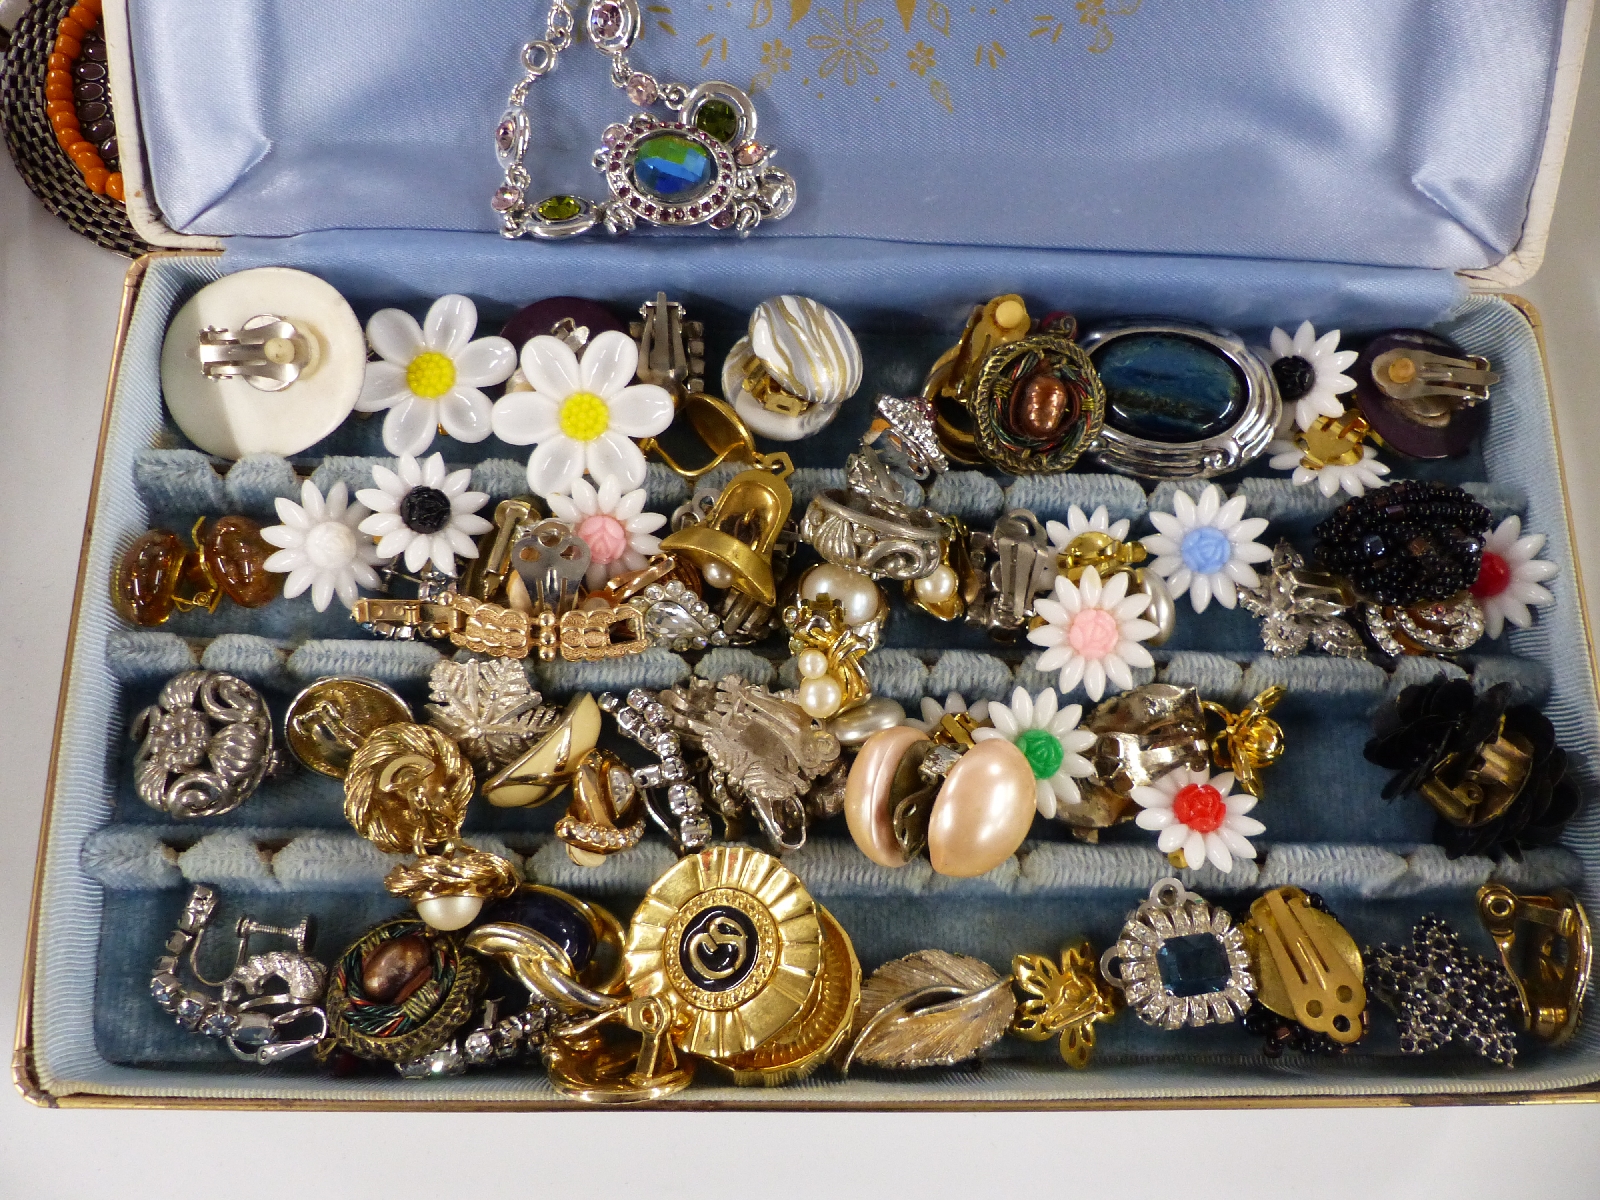 A collection of costume jewellery including necklaces, earrings, Wedgwood pendant, enamel pendant, - Image 3 of 6